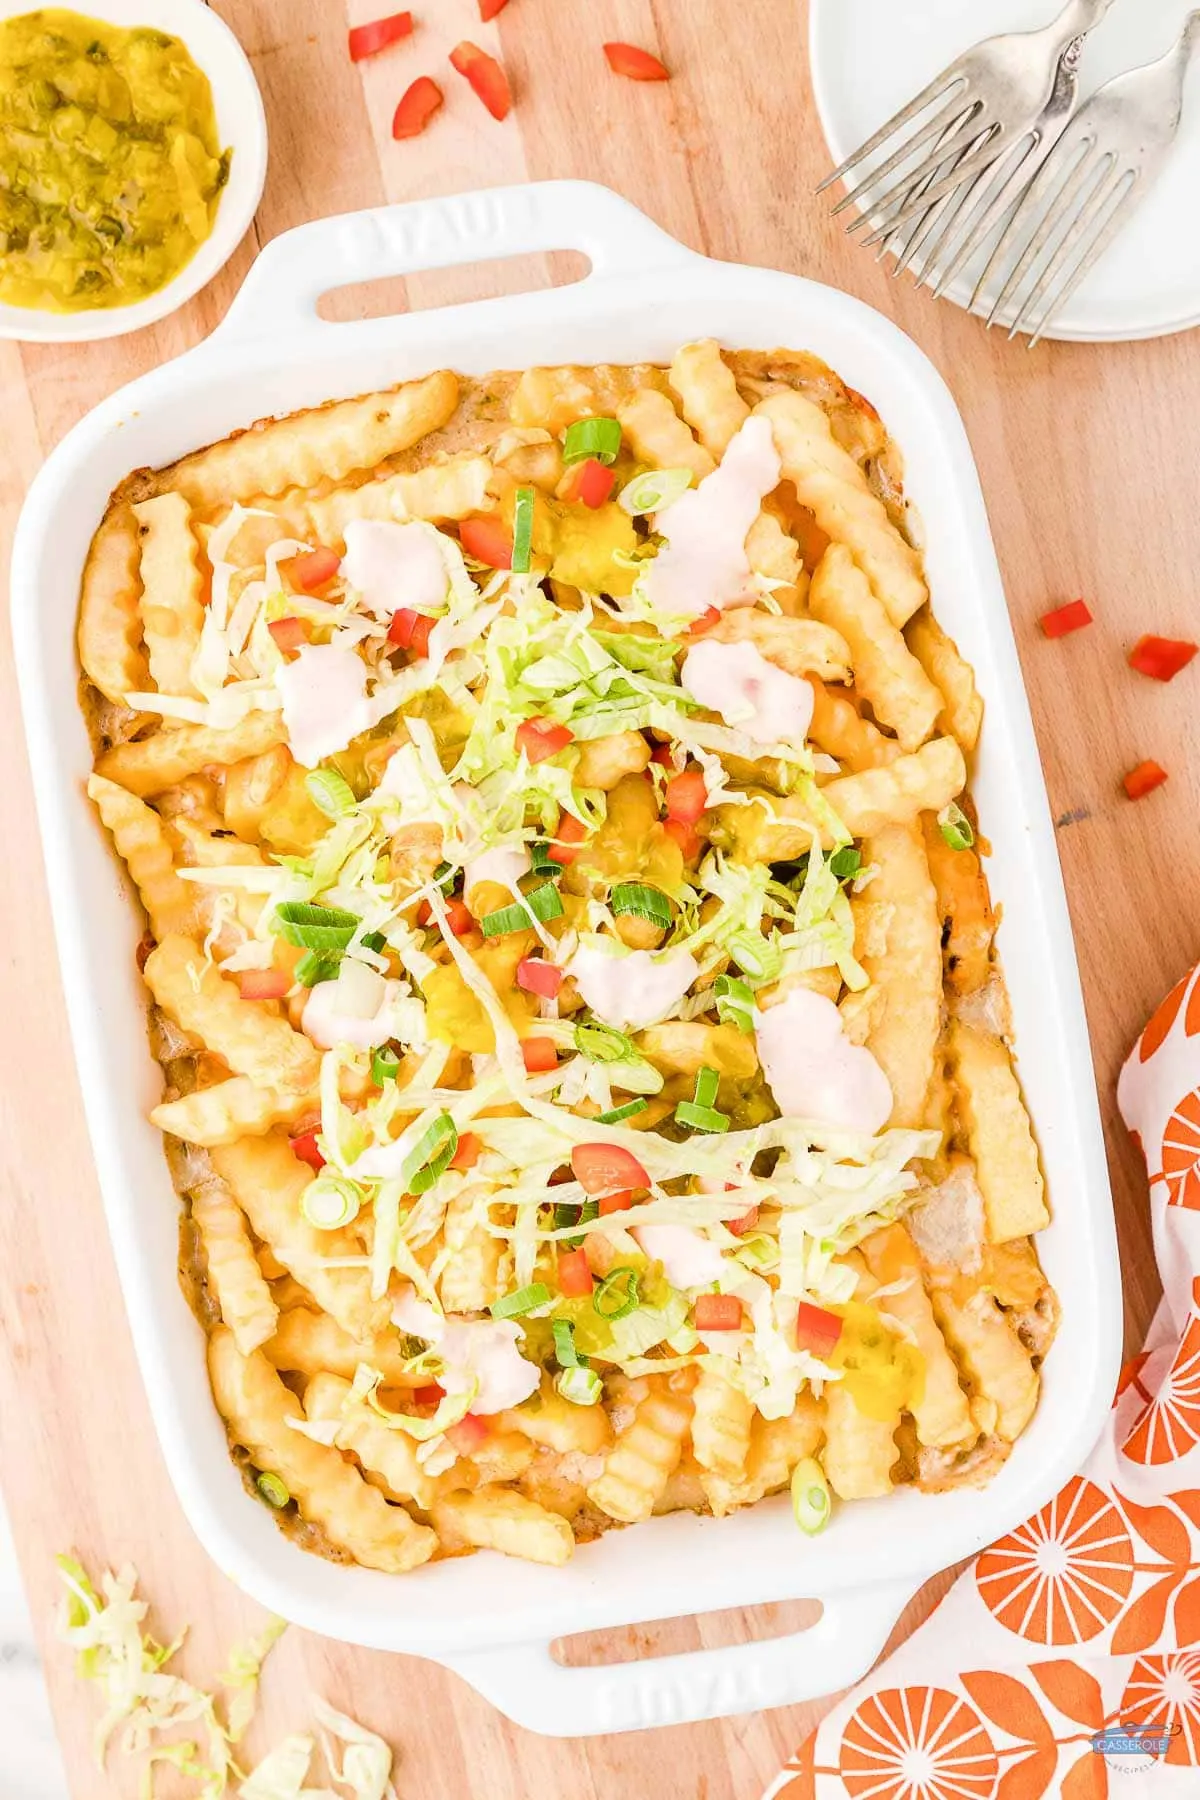 french fry casserole topped with lettuce and tomatoes